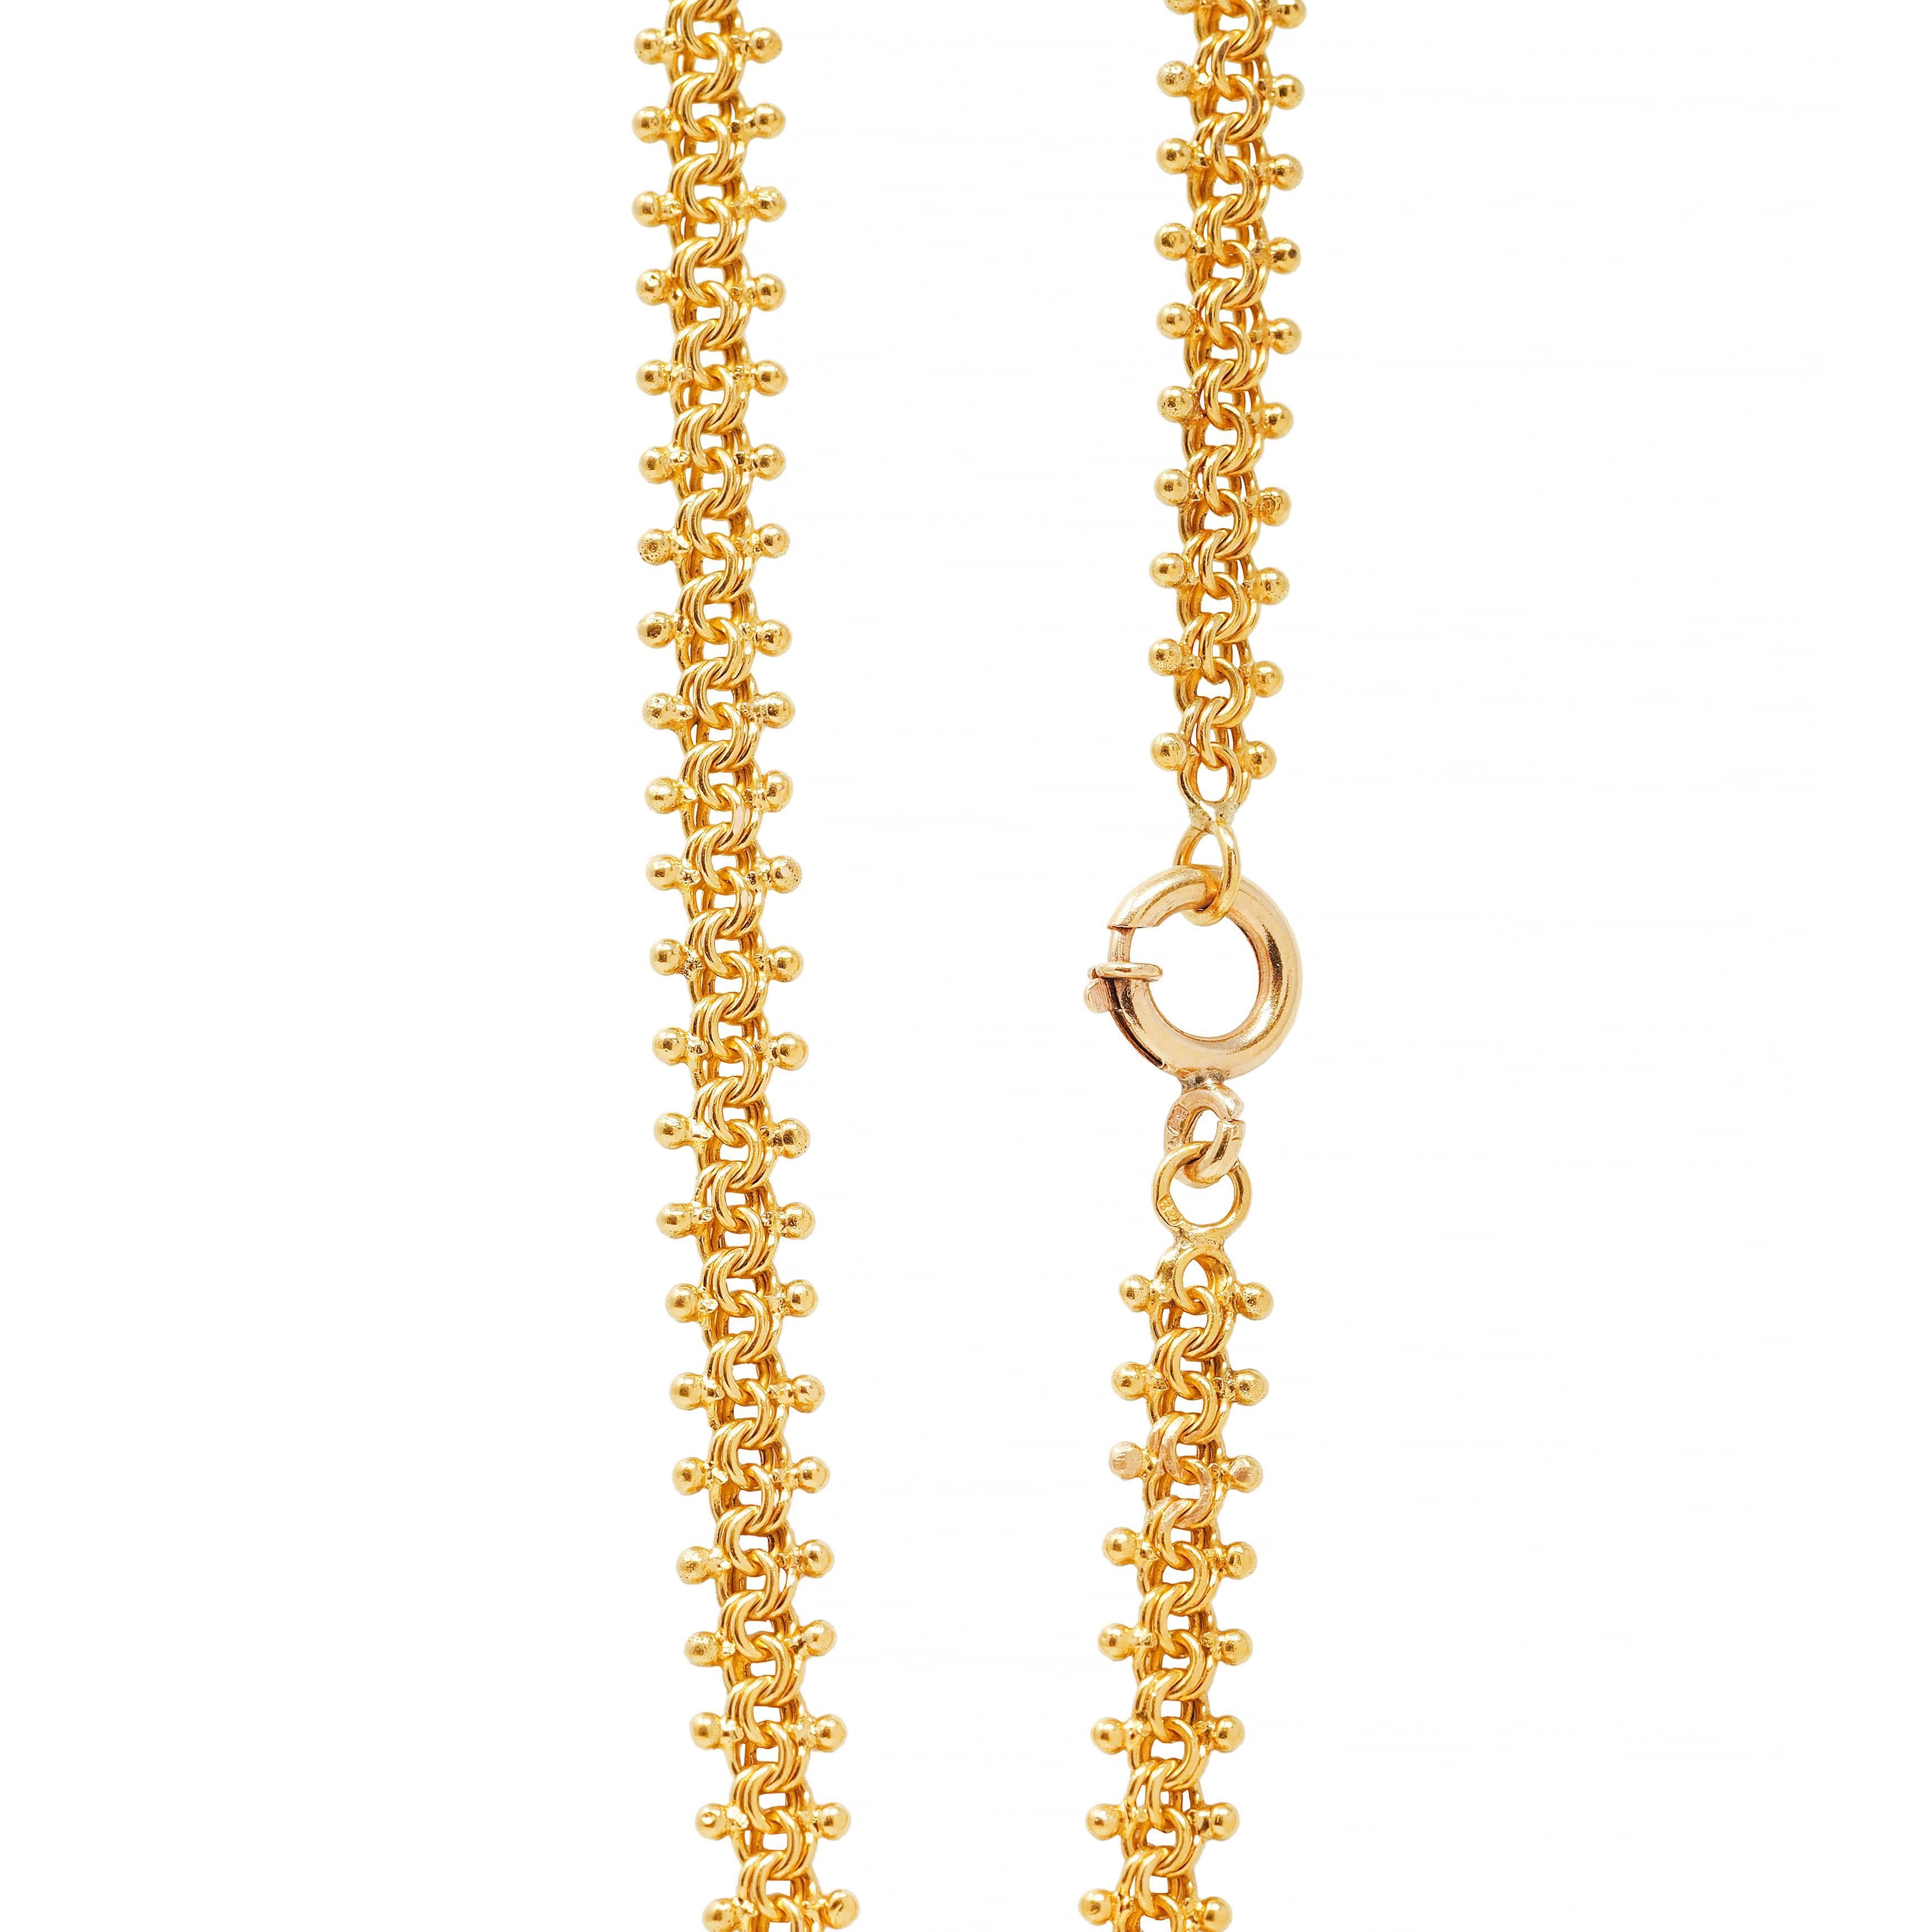 Victorian 18 Karat Yellow Gold Granulate Antique Fancy Chain Necklace For Sale 3